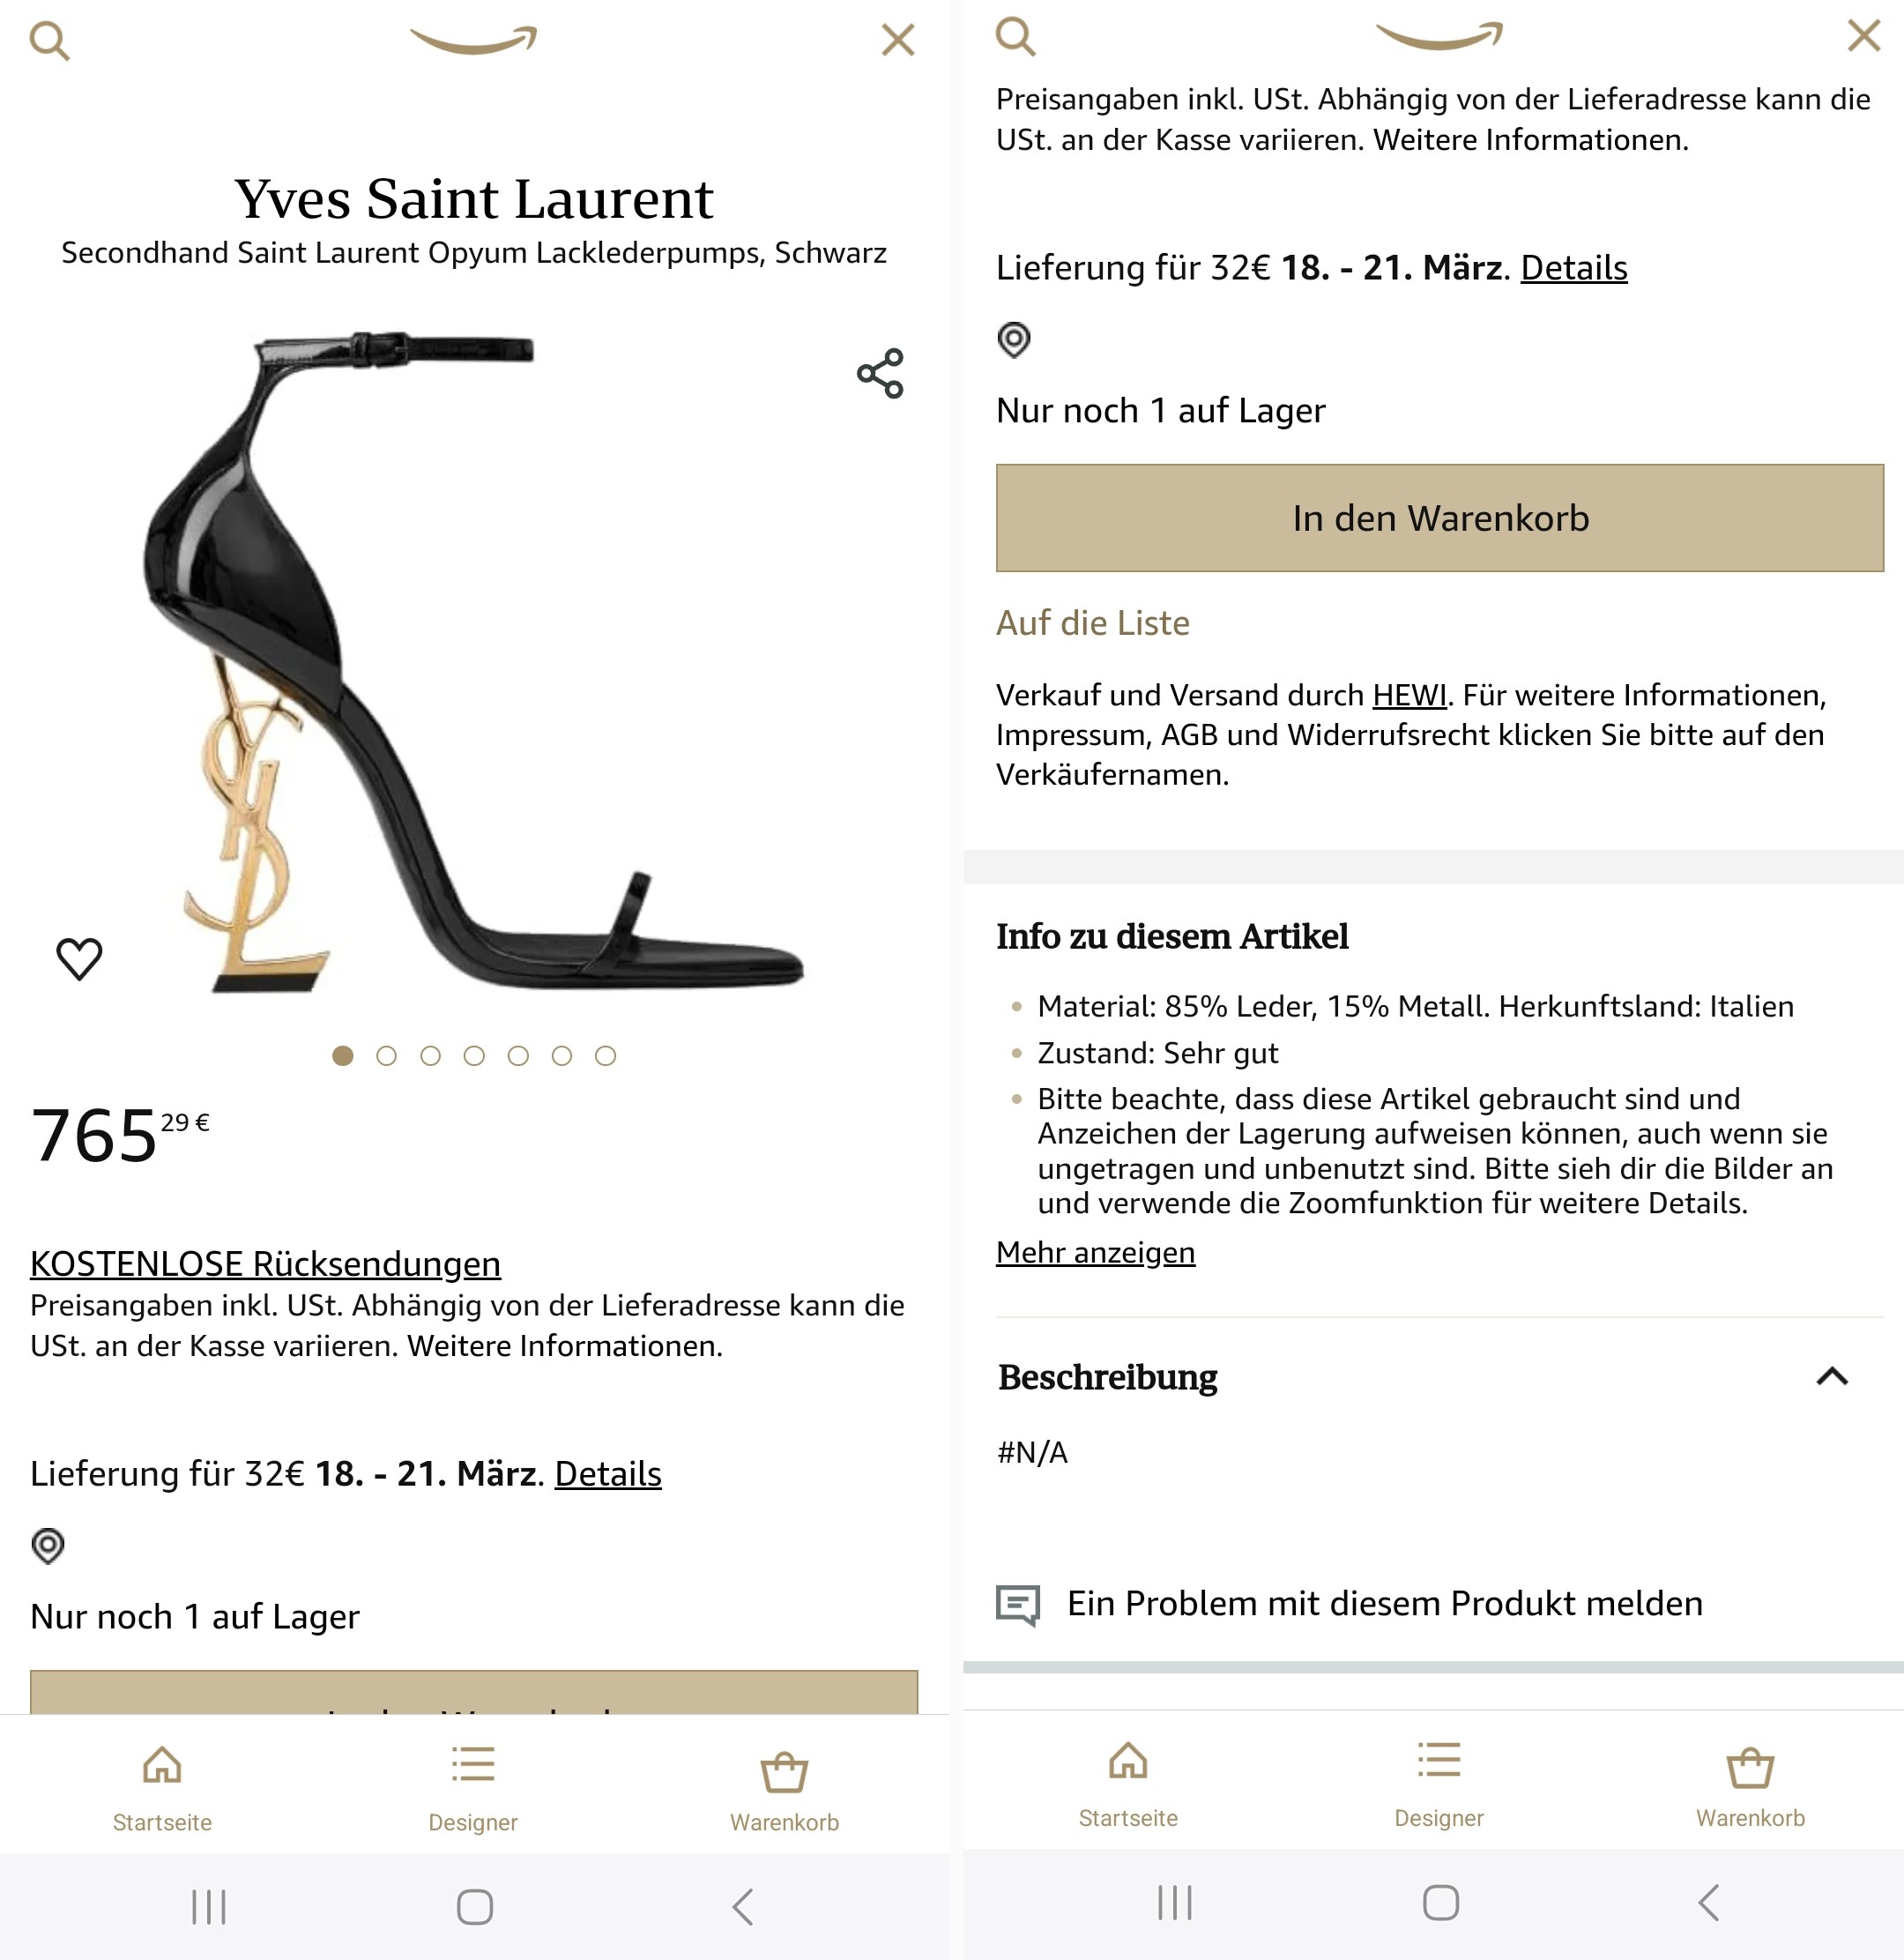 Screenshots of a product listing on Amazon Luxury Stores sold and shipped by HEWI. Translation:  Please note that these items are used and may show signs of storage, even if they are unworn and unused. Please look at the pictures and use the zoom fun